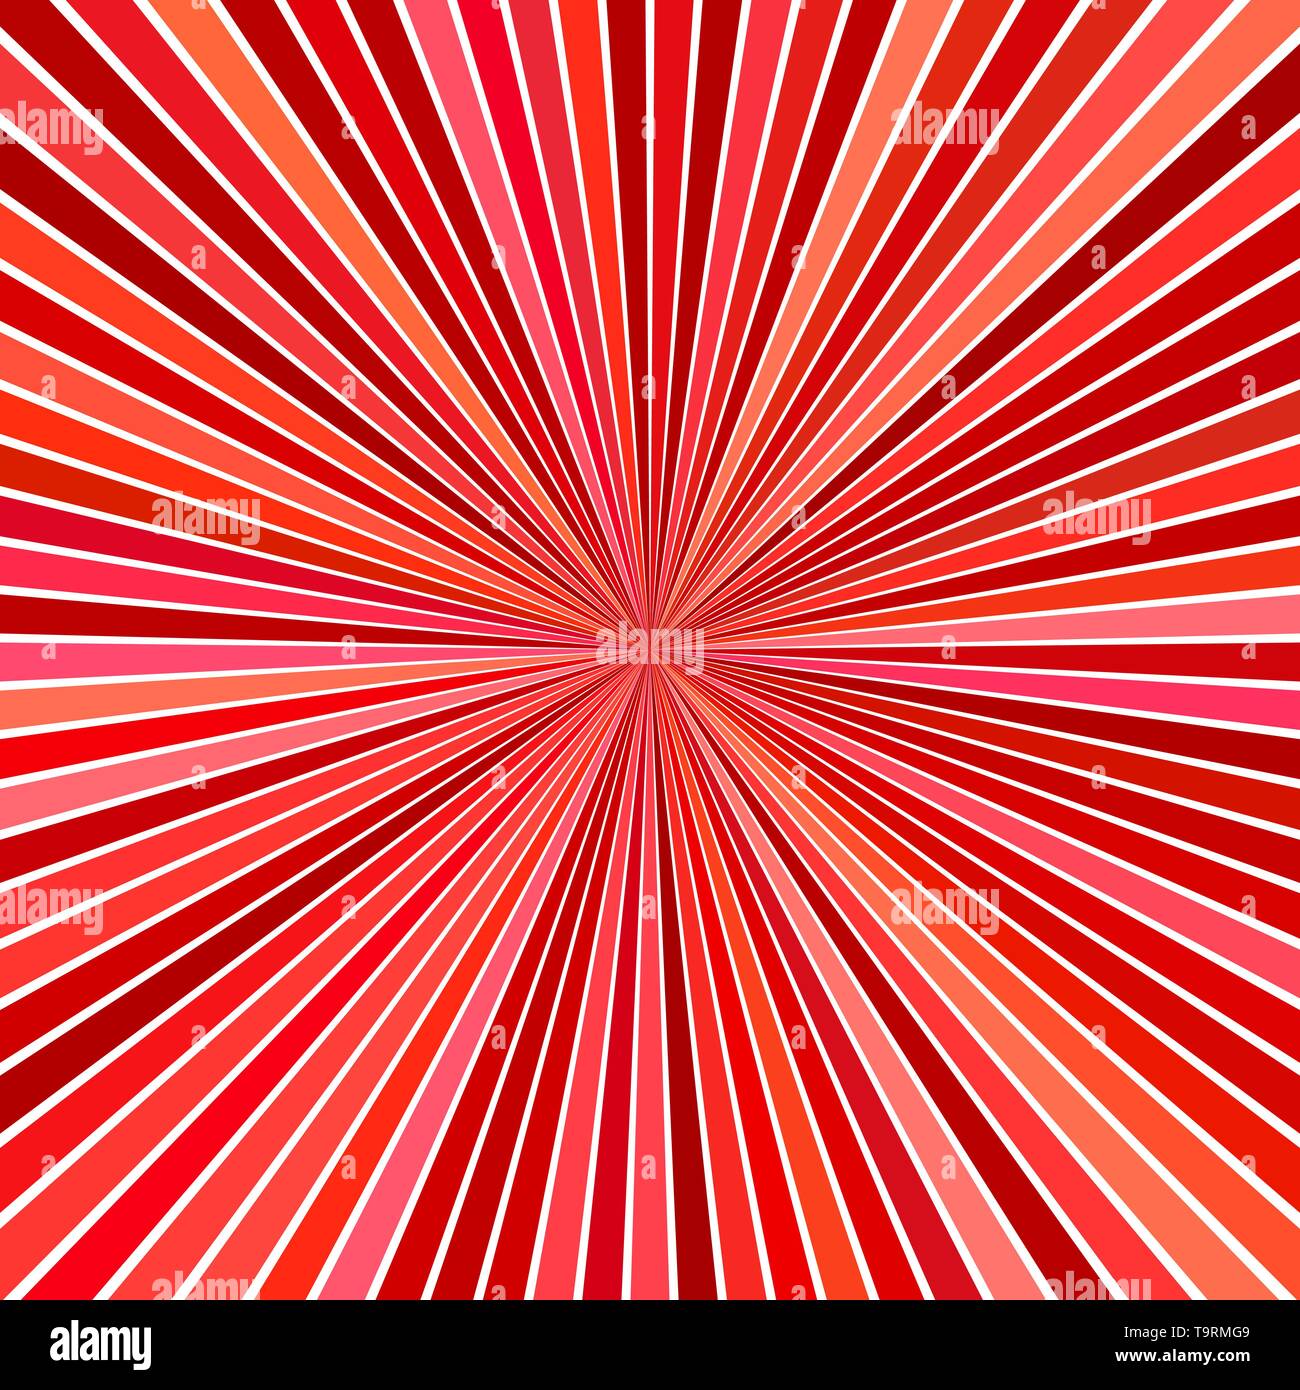 Red geometrical abstract starburst background - vector graphic from striped rays Stock Vector